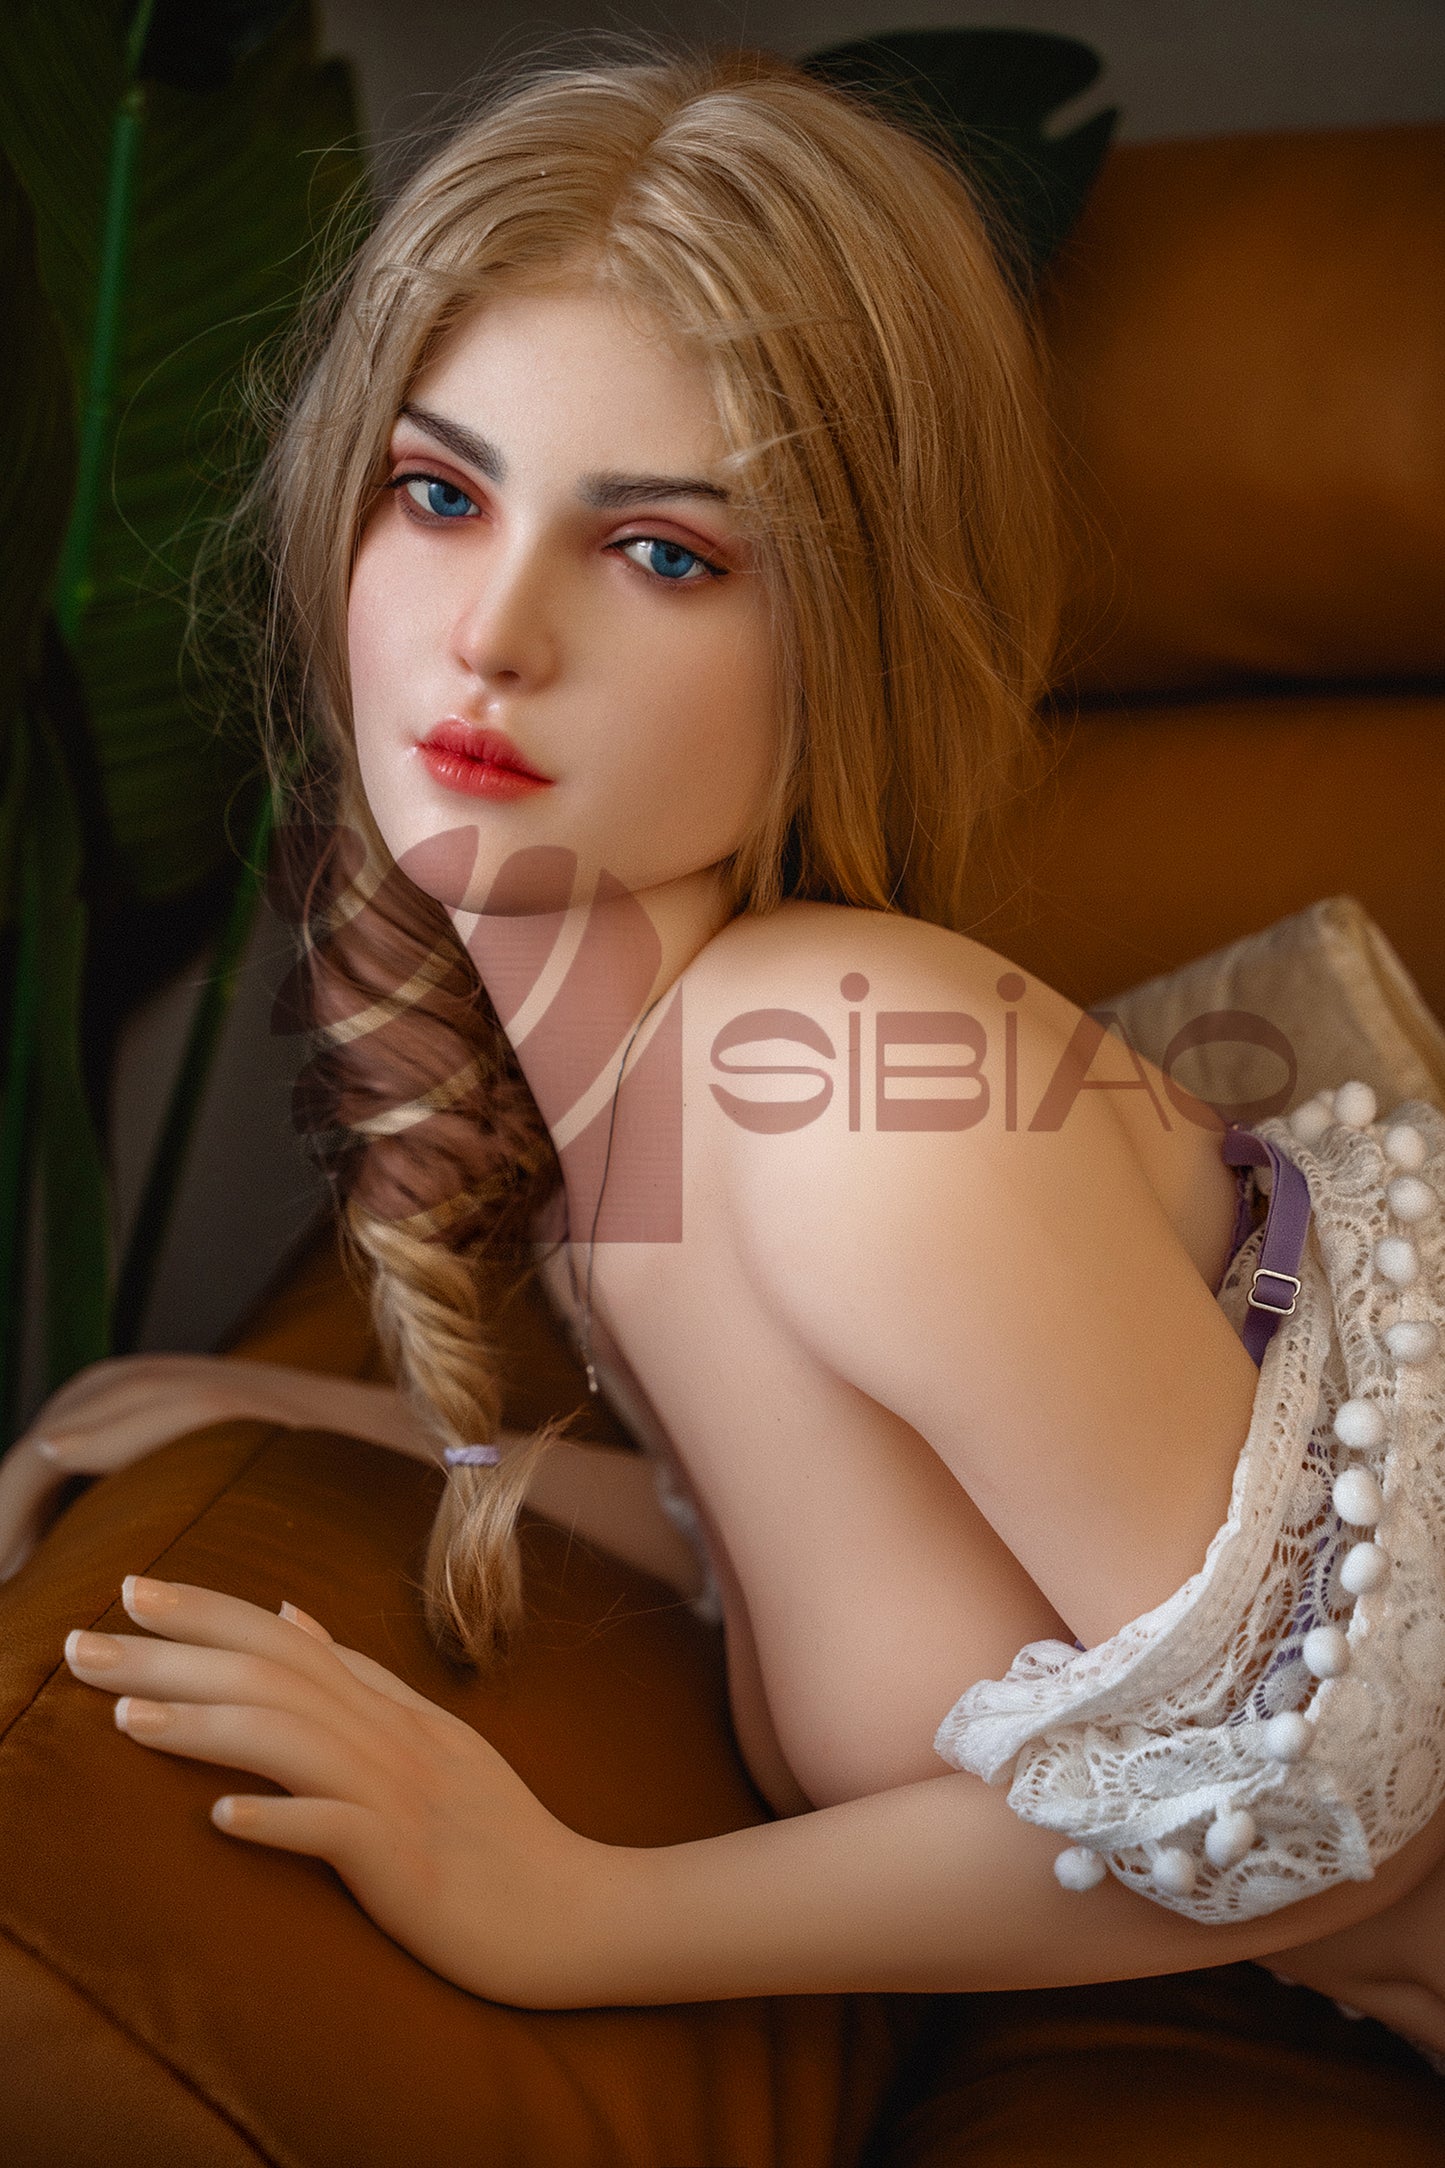 (Customized model) 158cm/62in. RD-S20-158 xanthe B Cup Silicone Love Doll